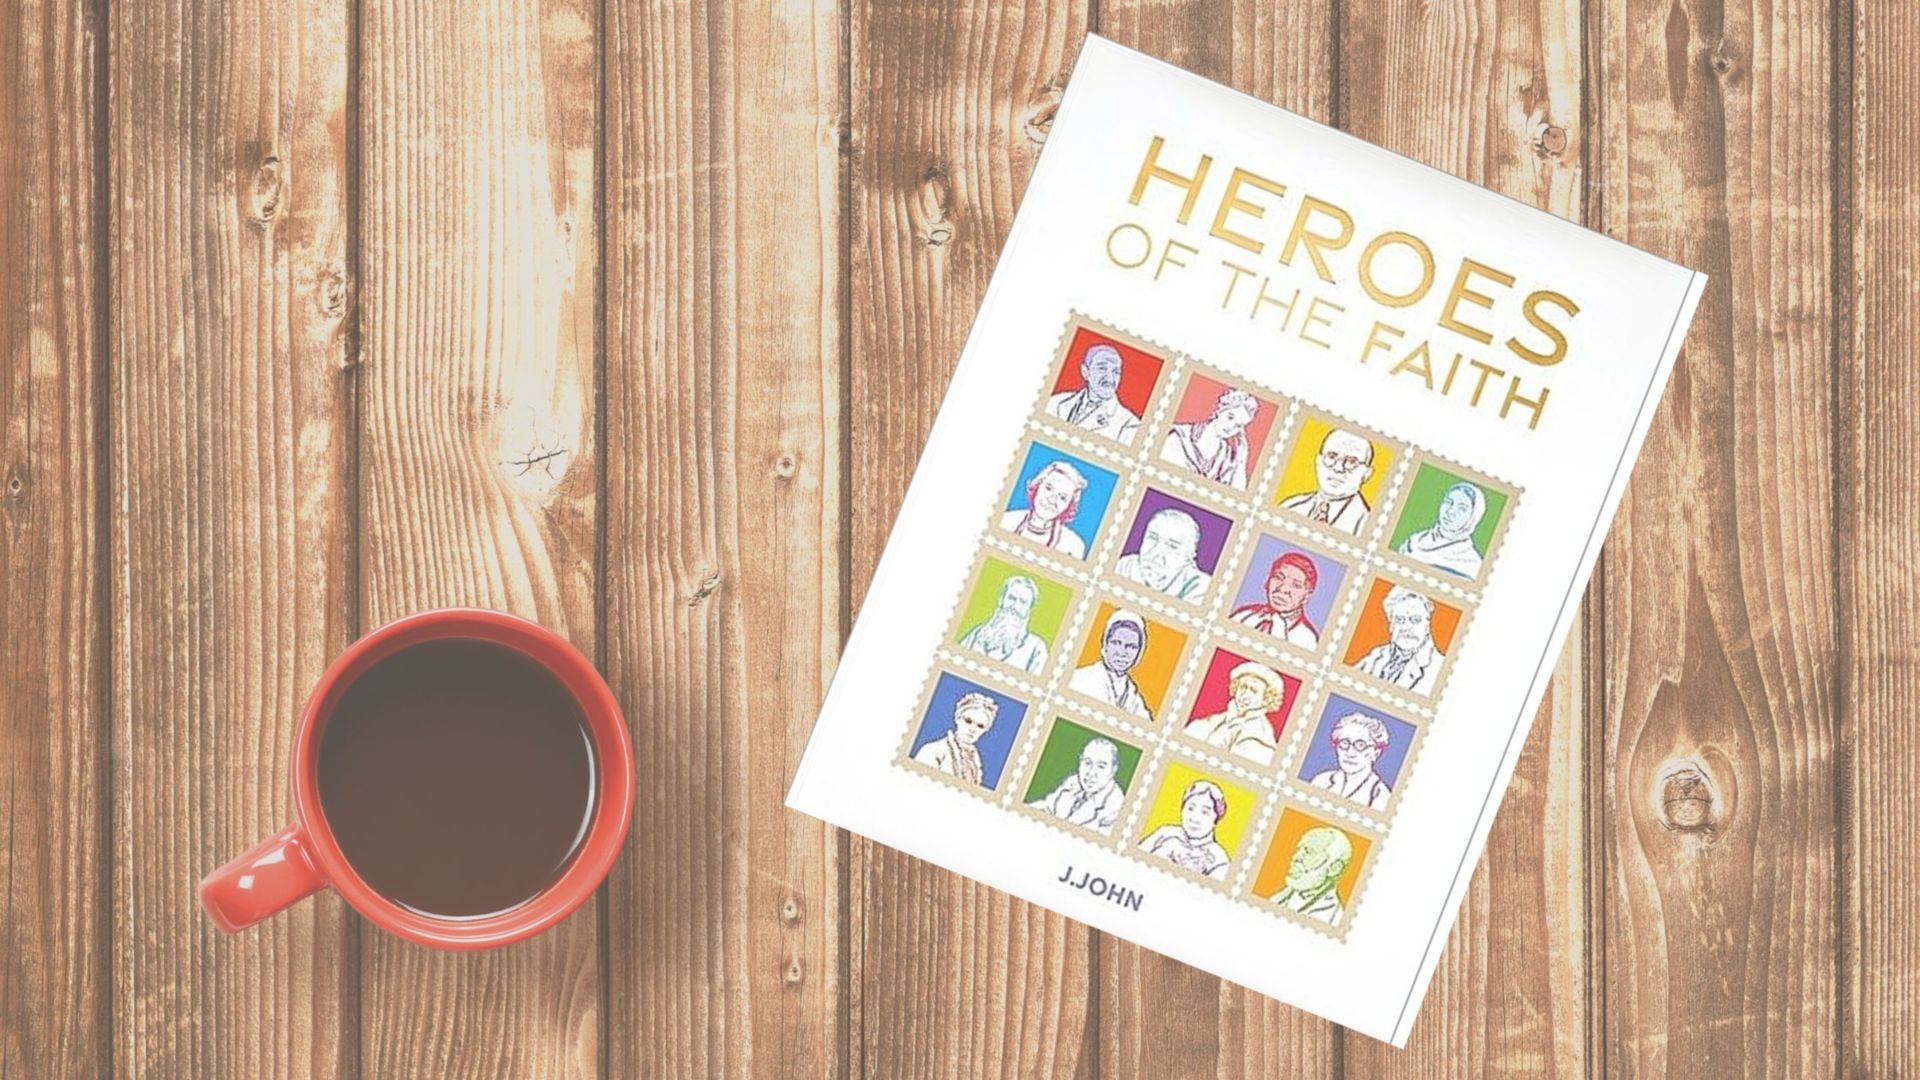  An article on the book 'Heroes of the Faith' by the author J.John